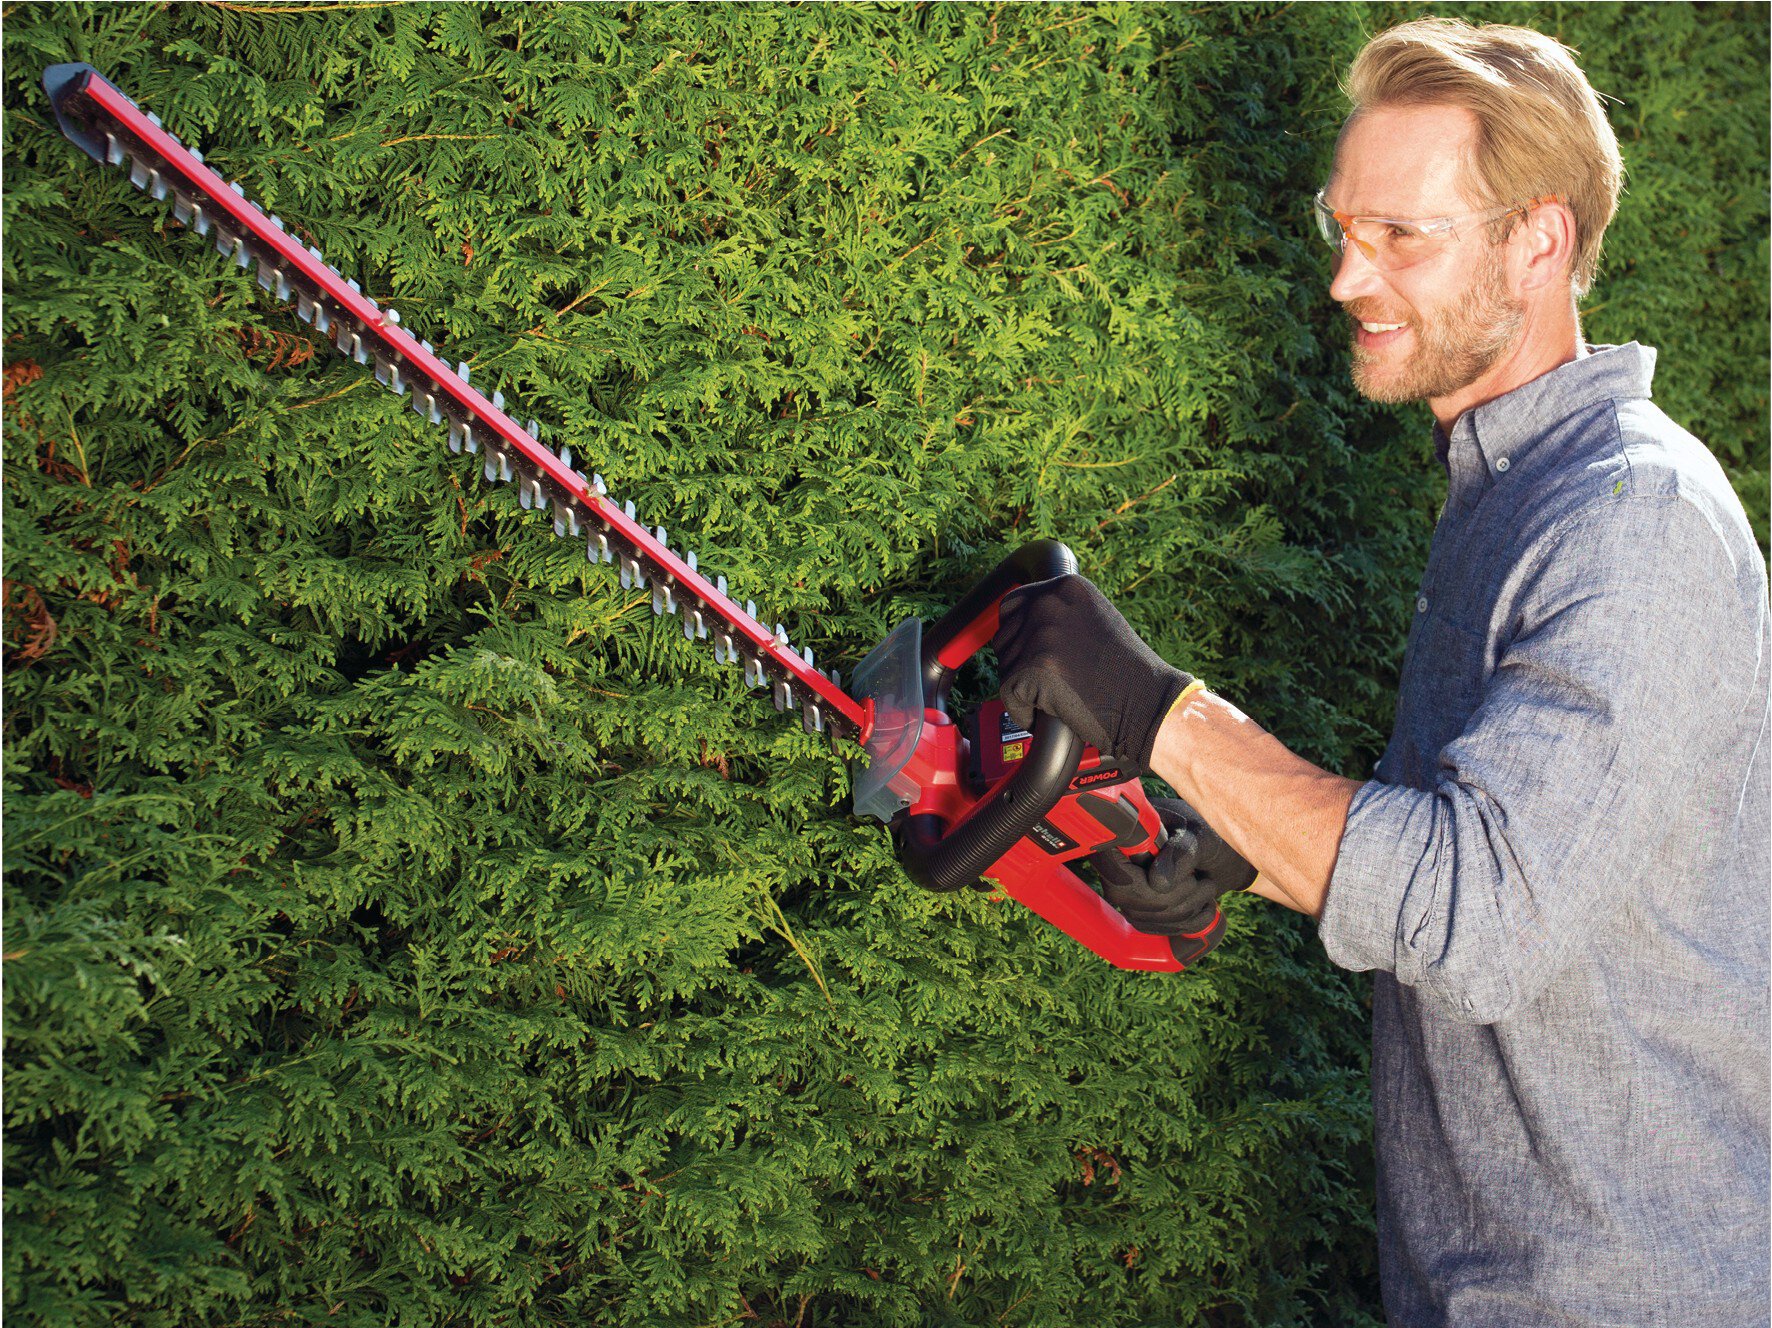 einhell-expert-cordless-hedge-trimmer-3410930-example_usage-001